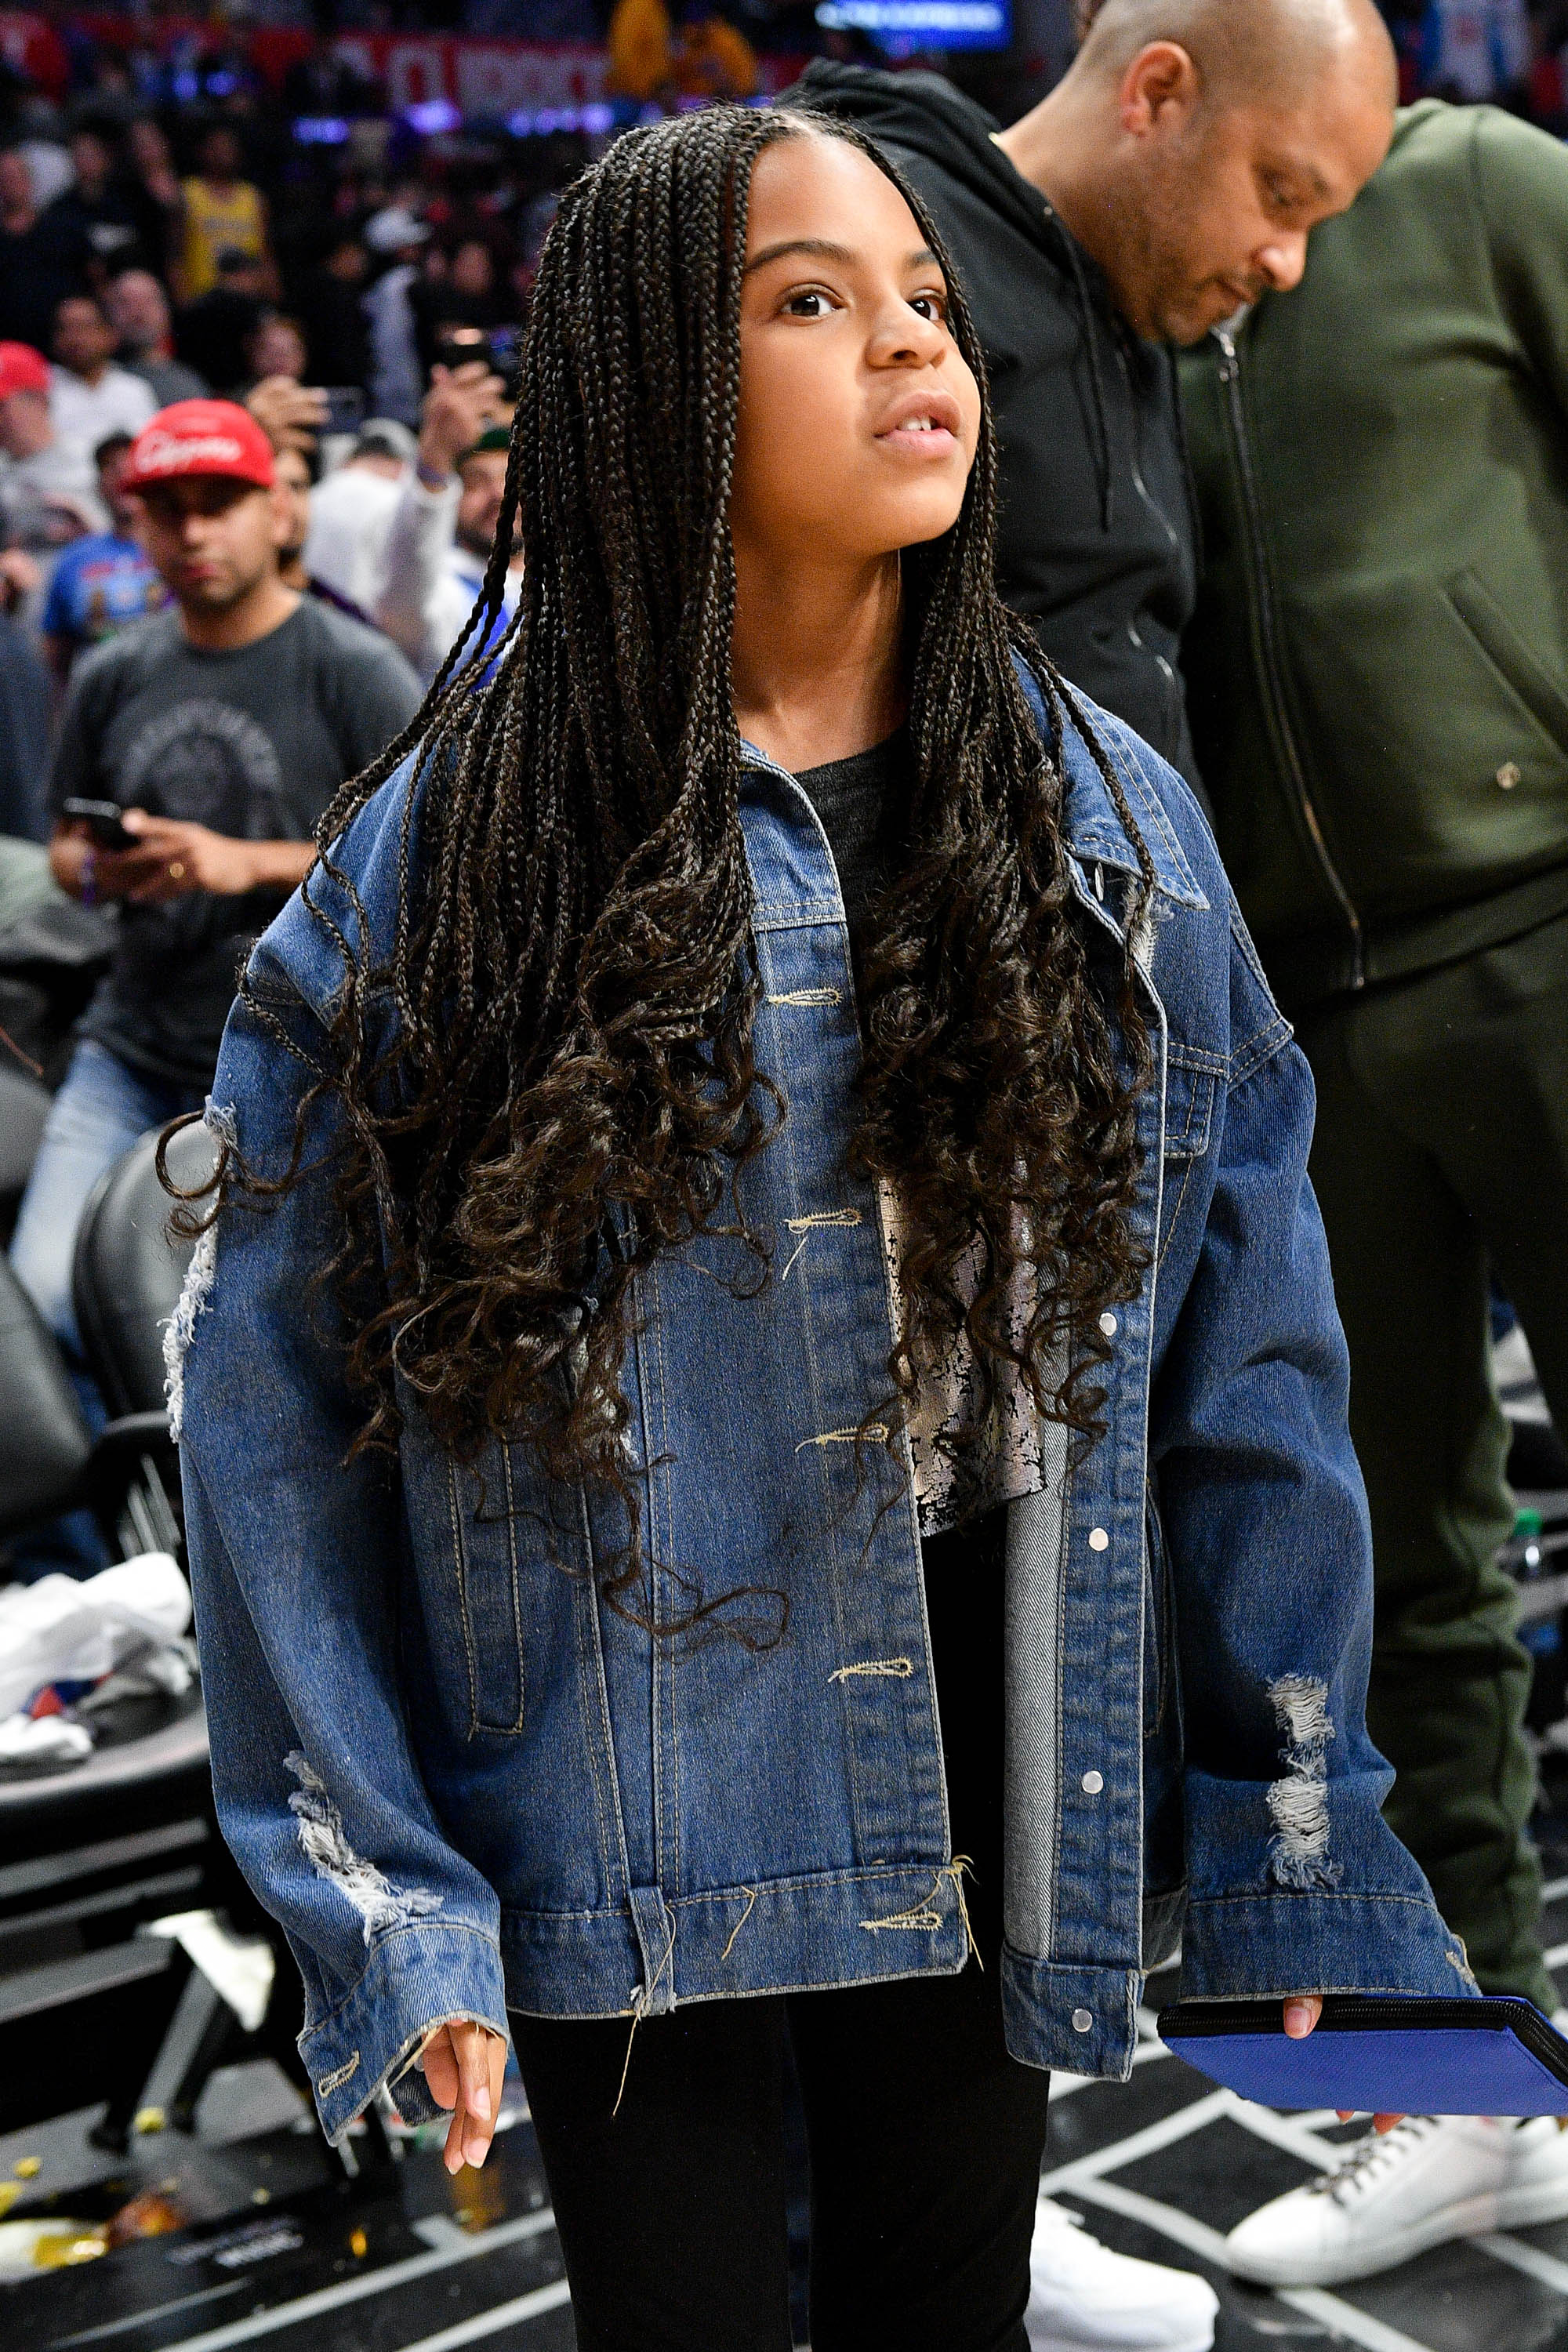 Blue Ivy Carter attends a basketball game between the Los Angeles Clippers and the Los Angeles Lakers on March 8, 2020 in Los Angeles, California | Source: Getty Images